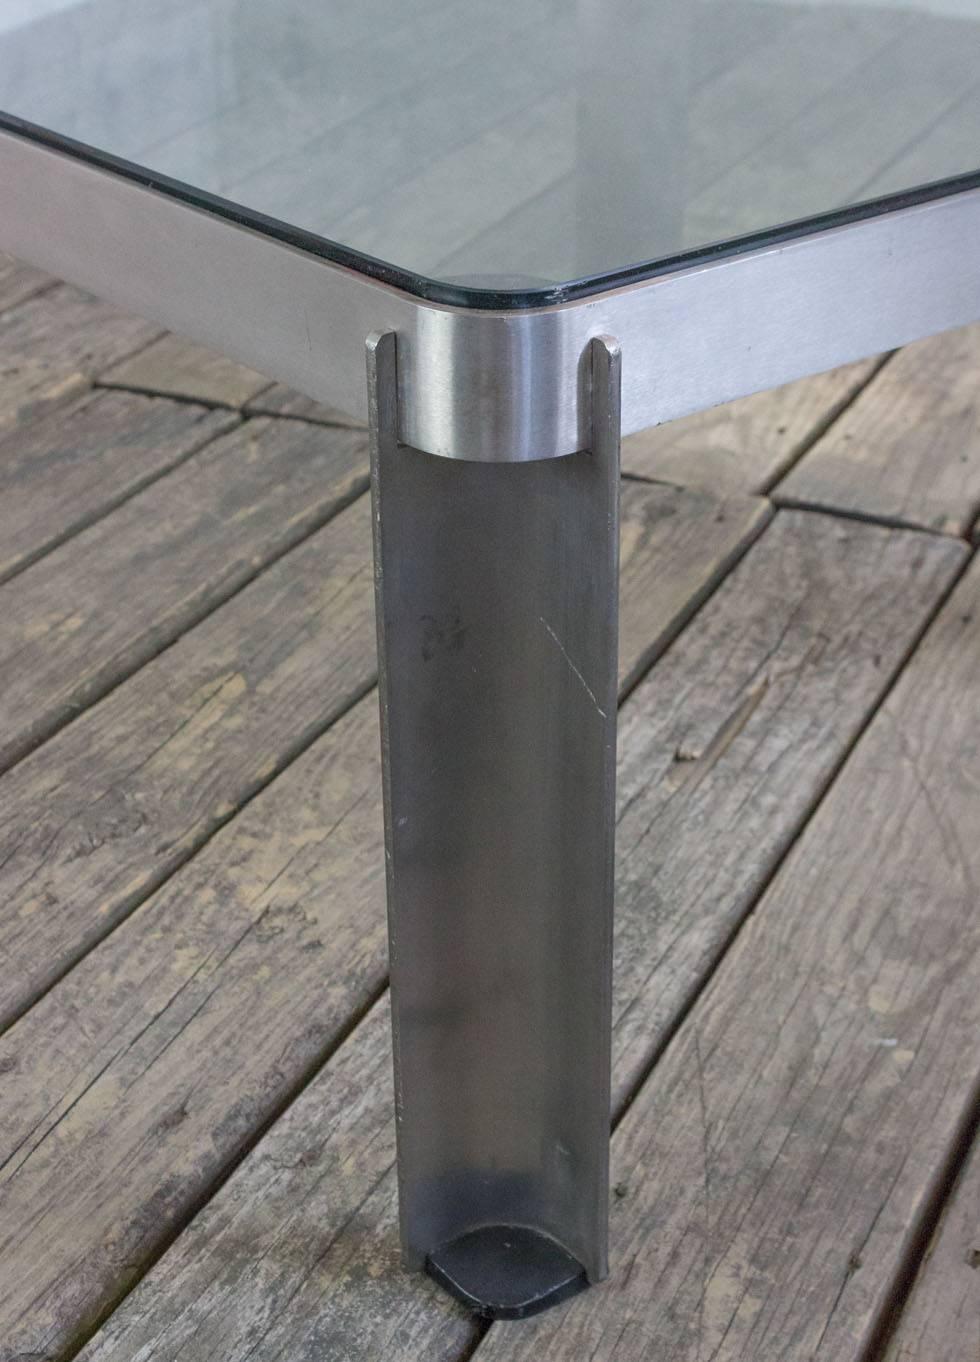 This vintage coffee table, originating from France in the 1980s, features a brushed aluminum and glass construction that embodies the classic design of the era. The table's square shape is softened by rounded edges, creating a harmonious blend of